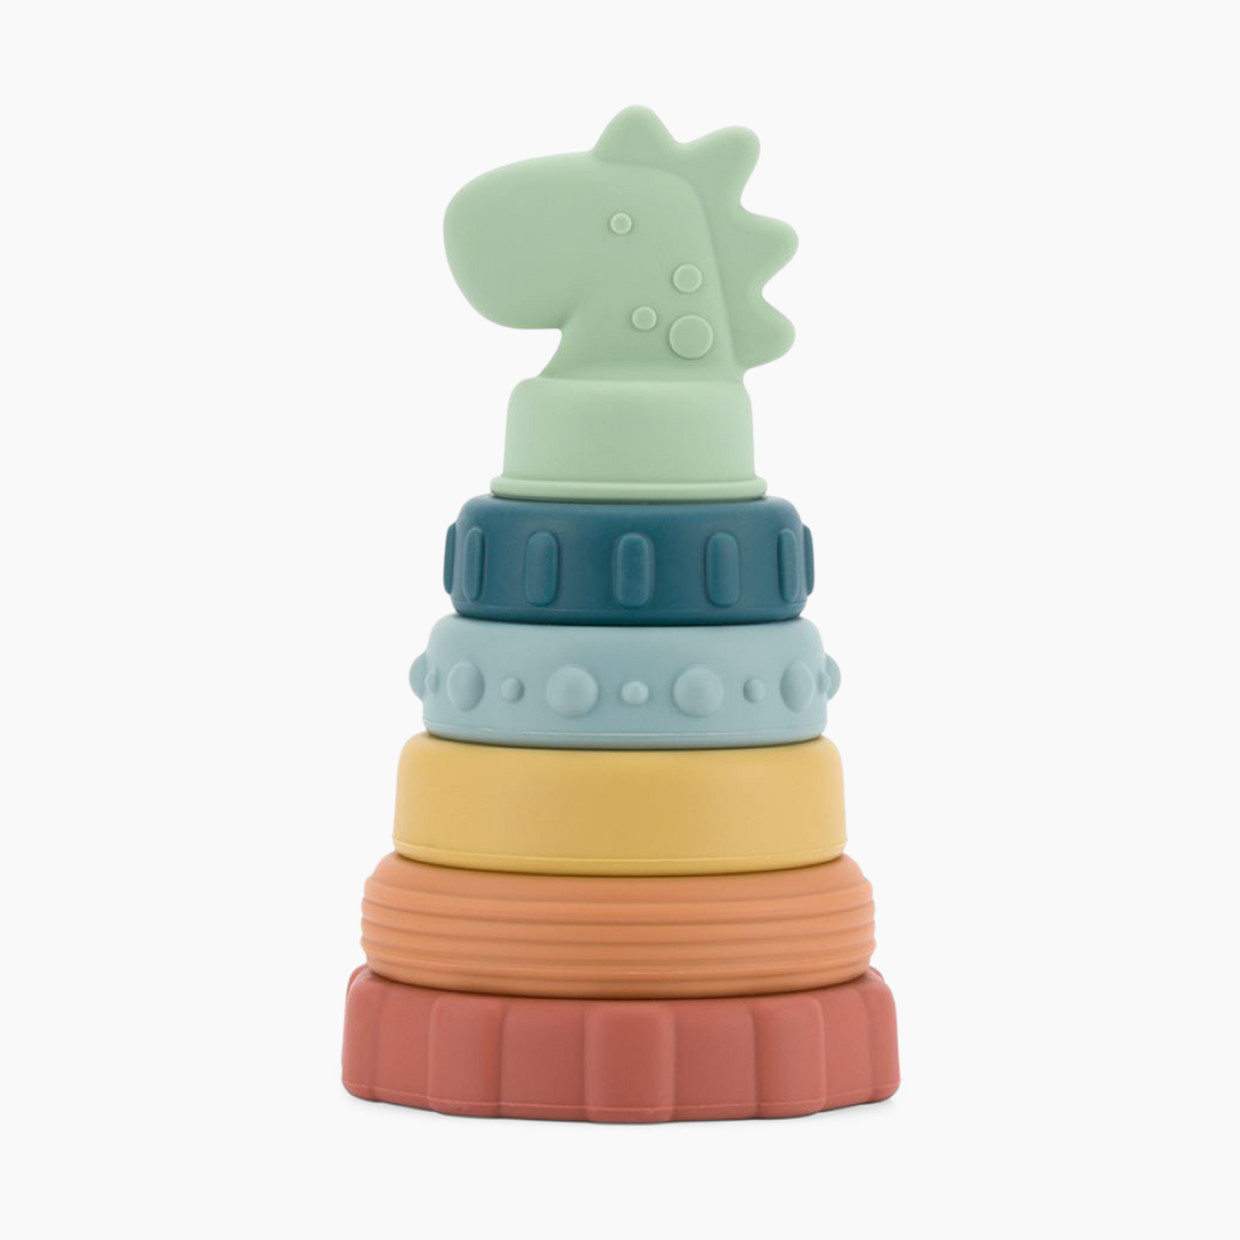 Itzy Ritzy Silicone Stacking and Teething Toy - Dino.